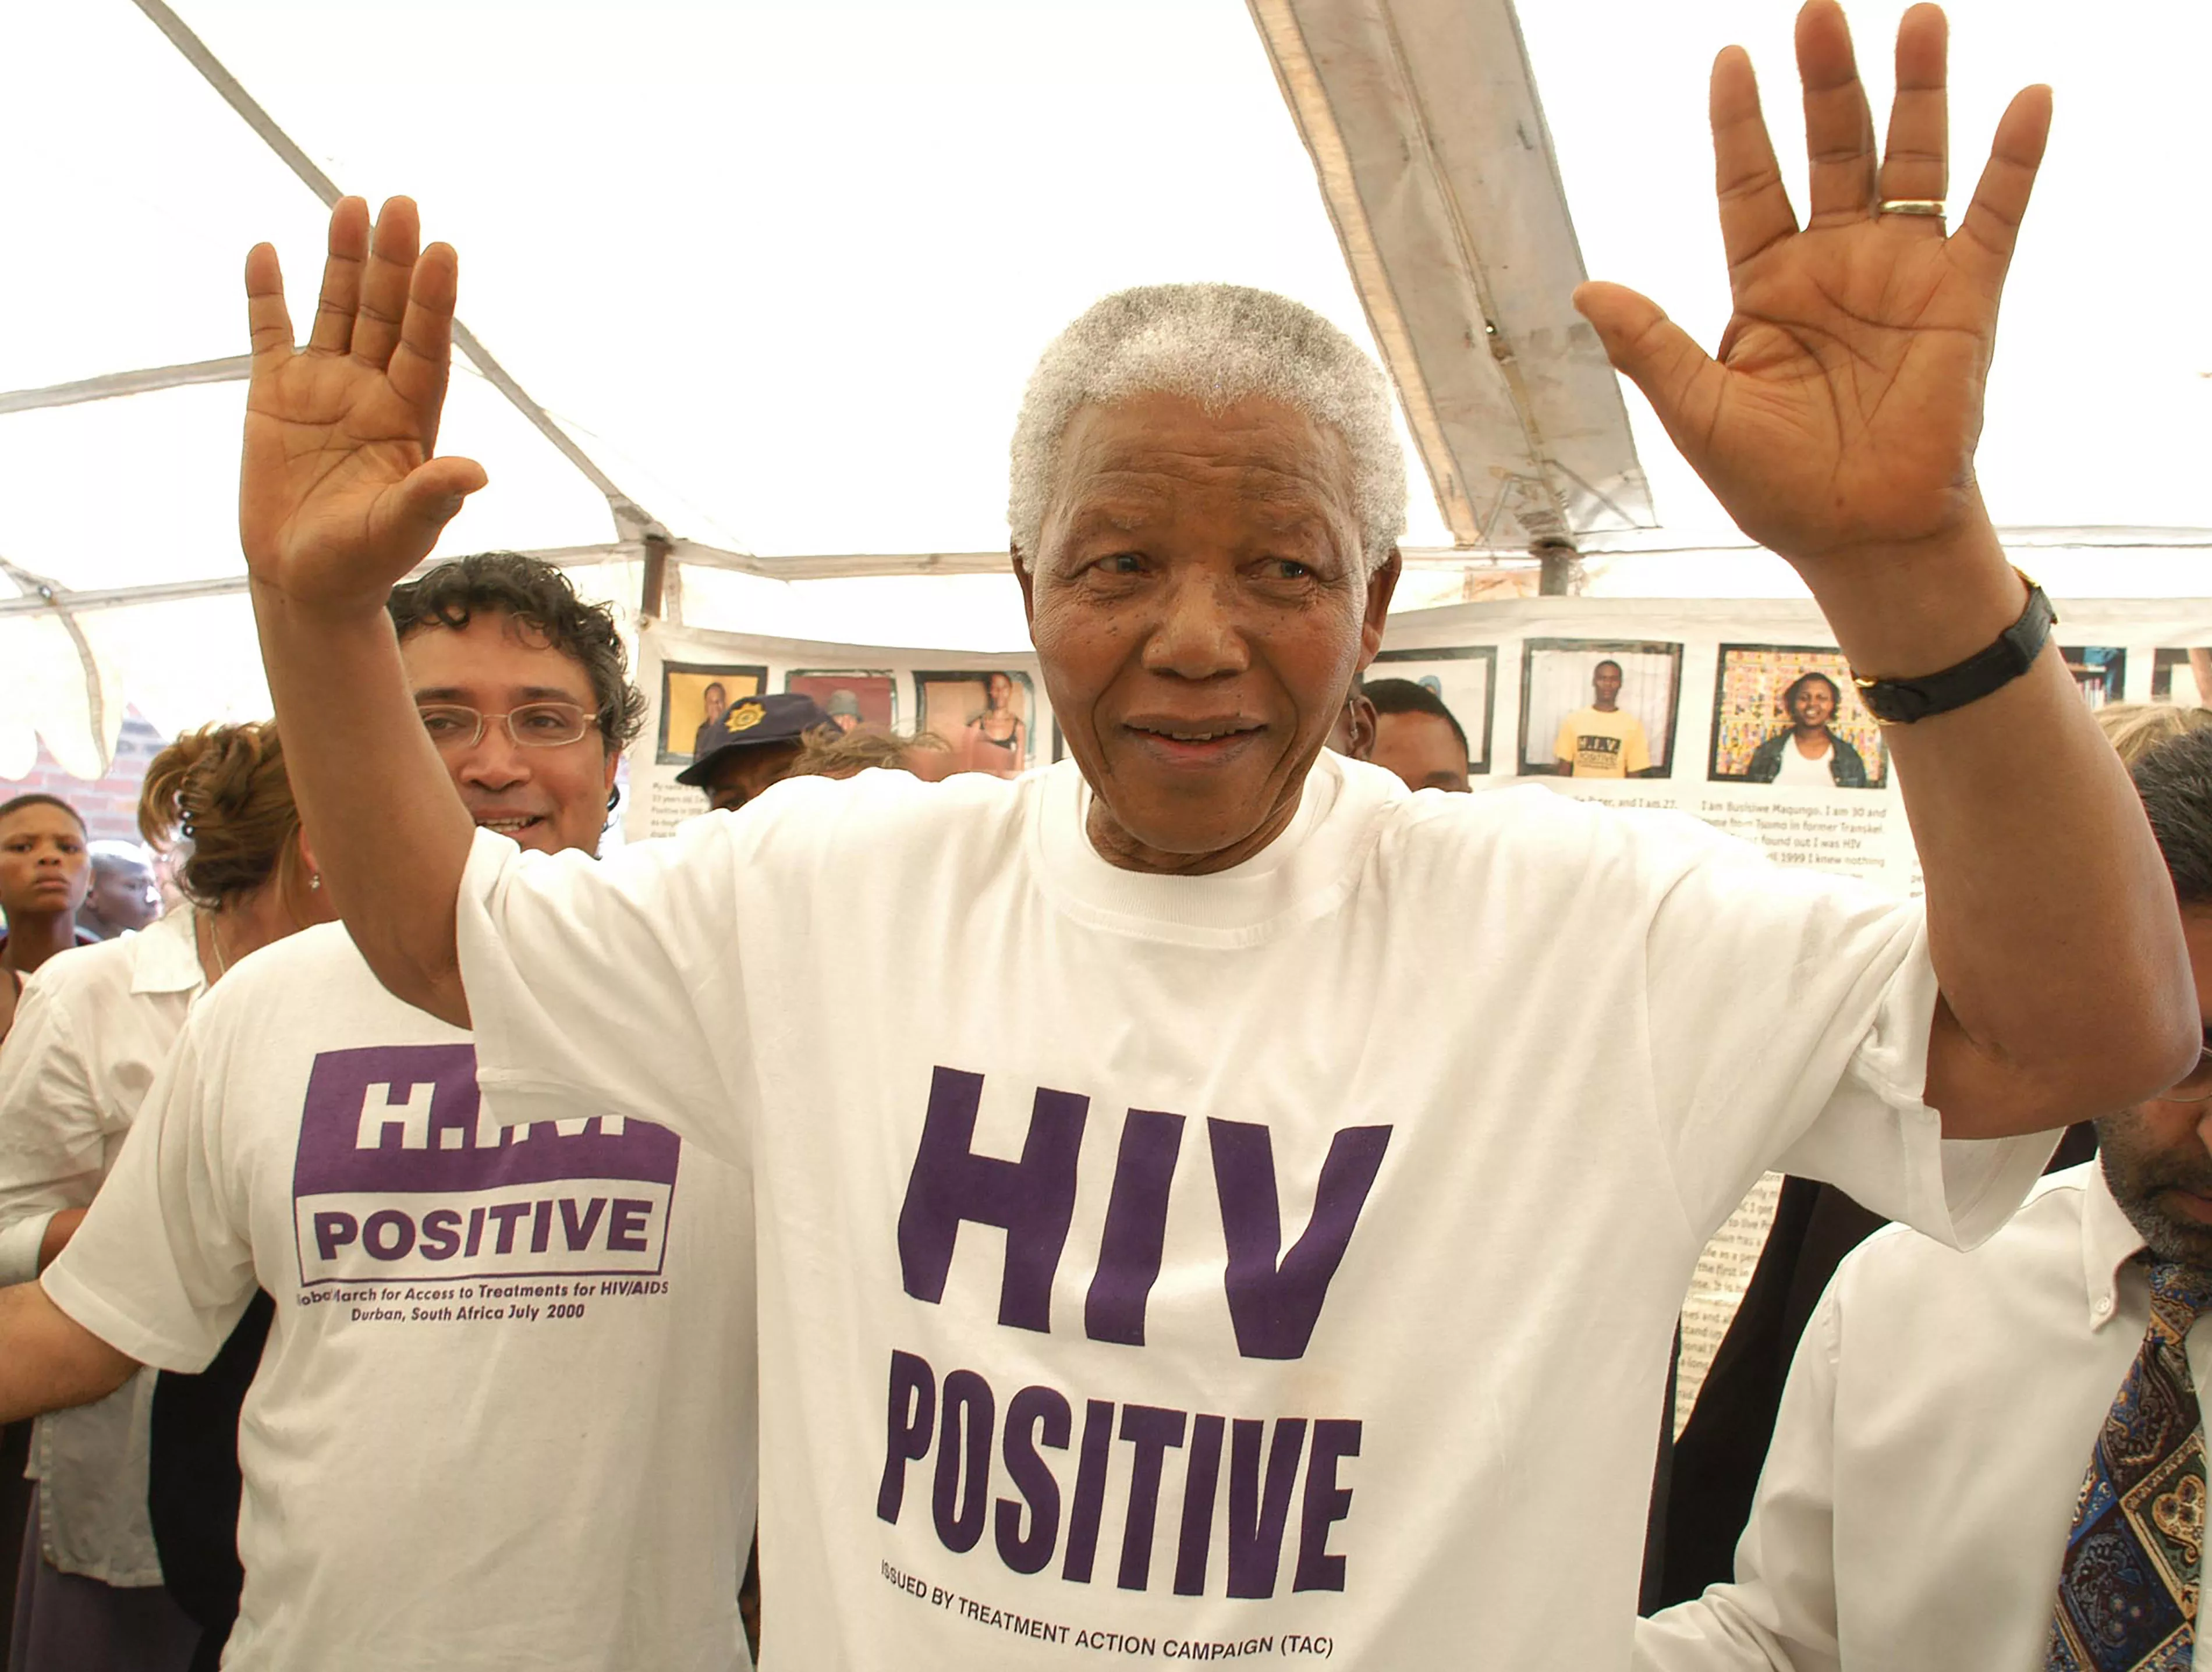 Former South African president Nelson Mandela has accepted the offer of a beneficiary of the project and has changed his shirt for an HIV-Positive T-shirt. See Zackie (Zackie Achmat of the Treatment Action Campaign, a South African NGO {TAC}) just behind.